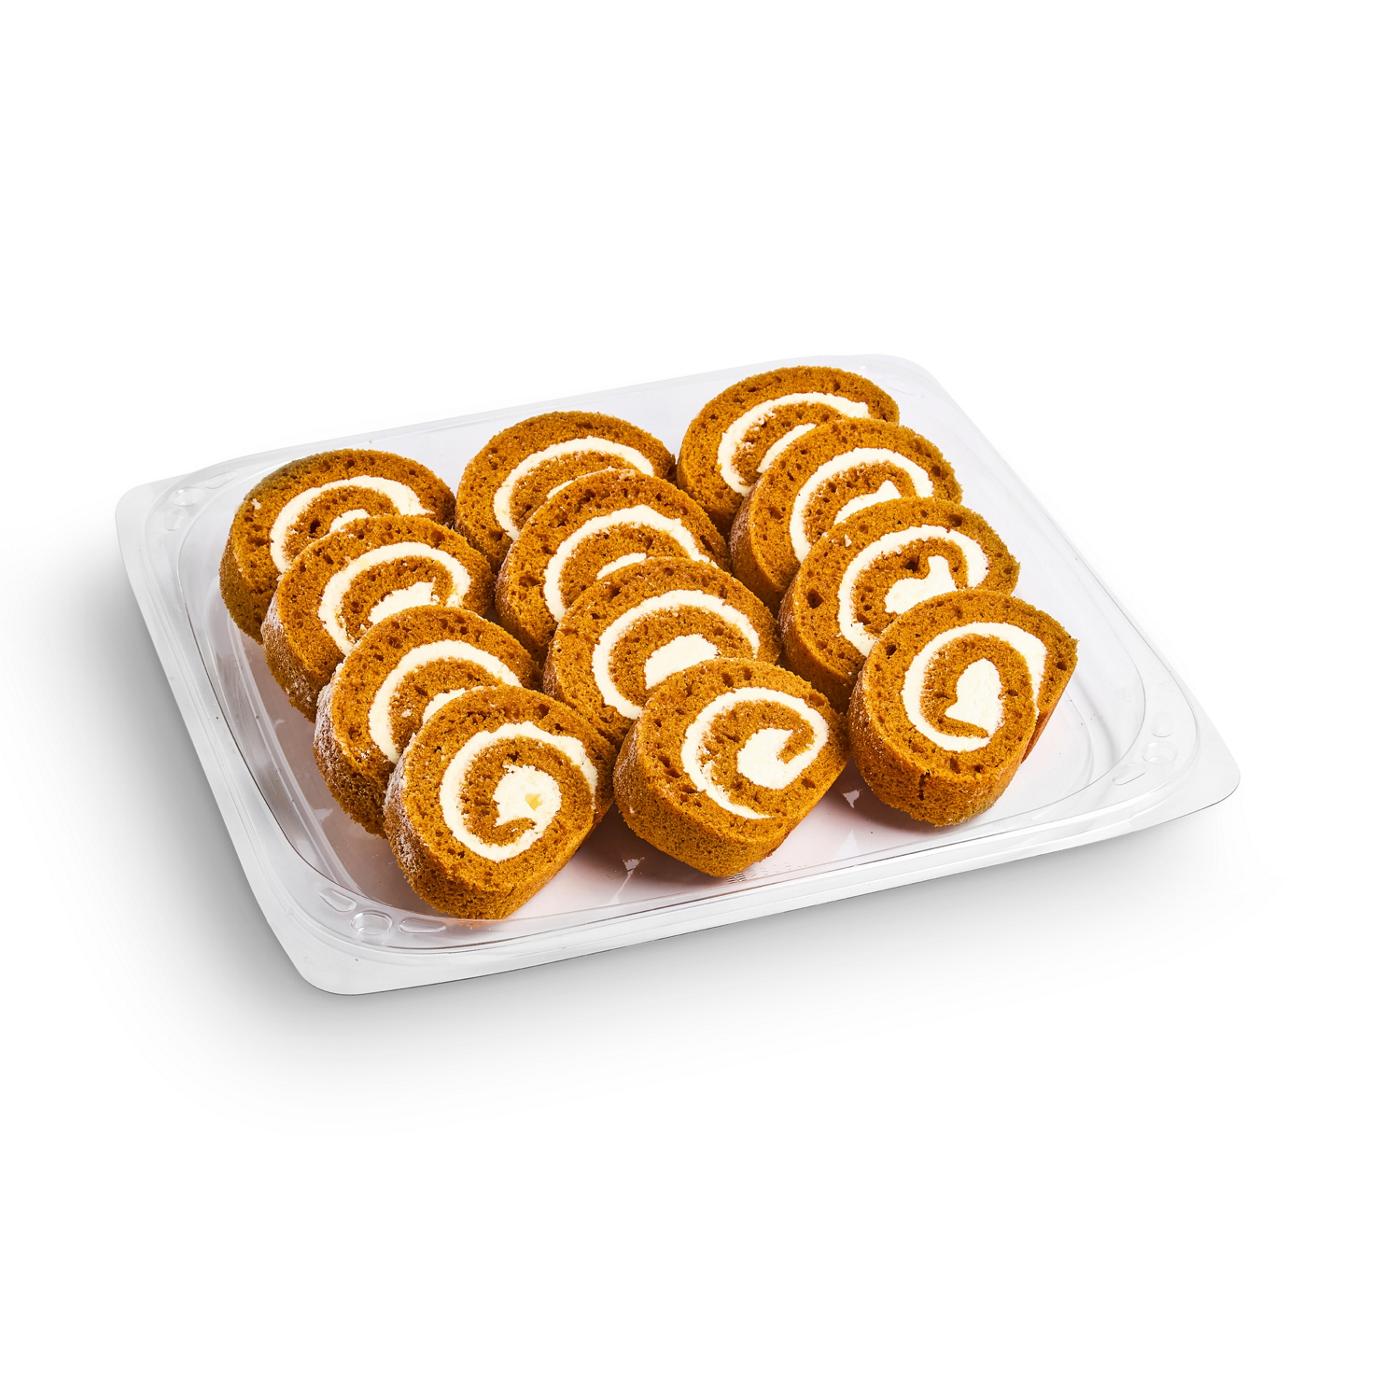 H-E-B Bakery Party Tray - Pumpkin Cake Rolls; image 2 of 3